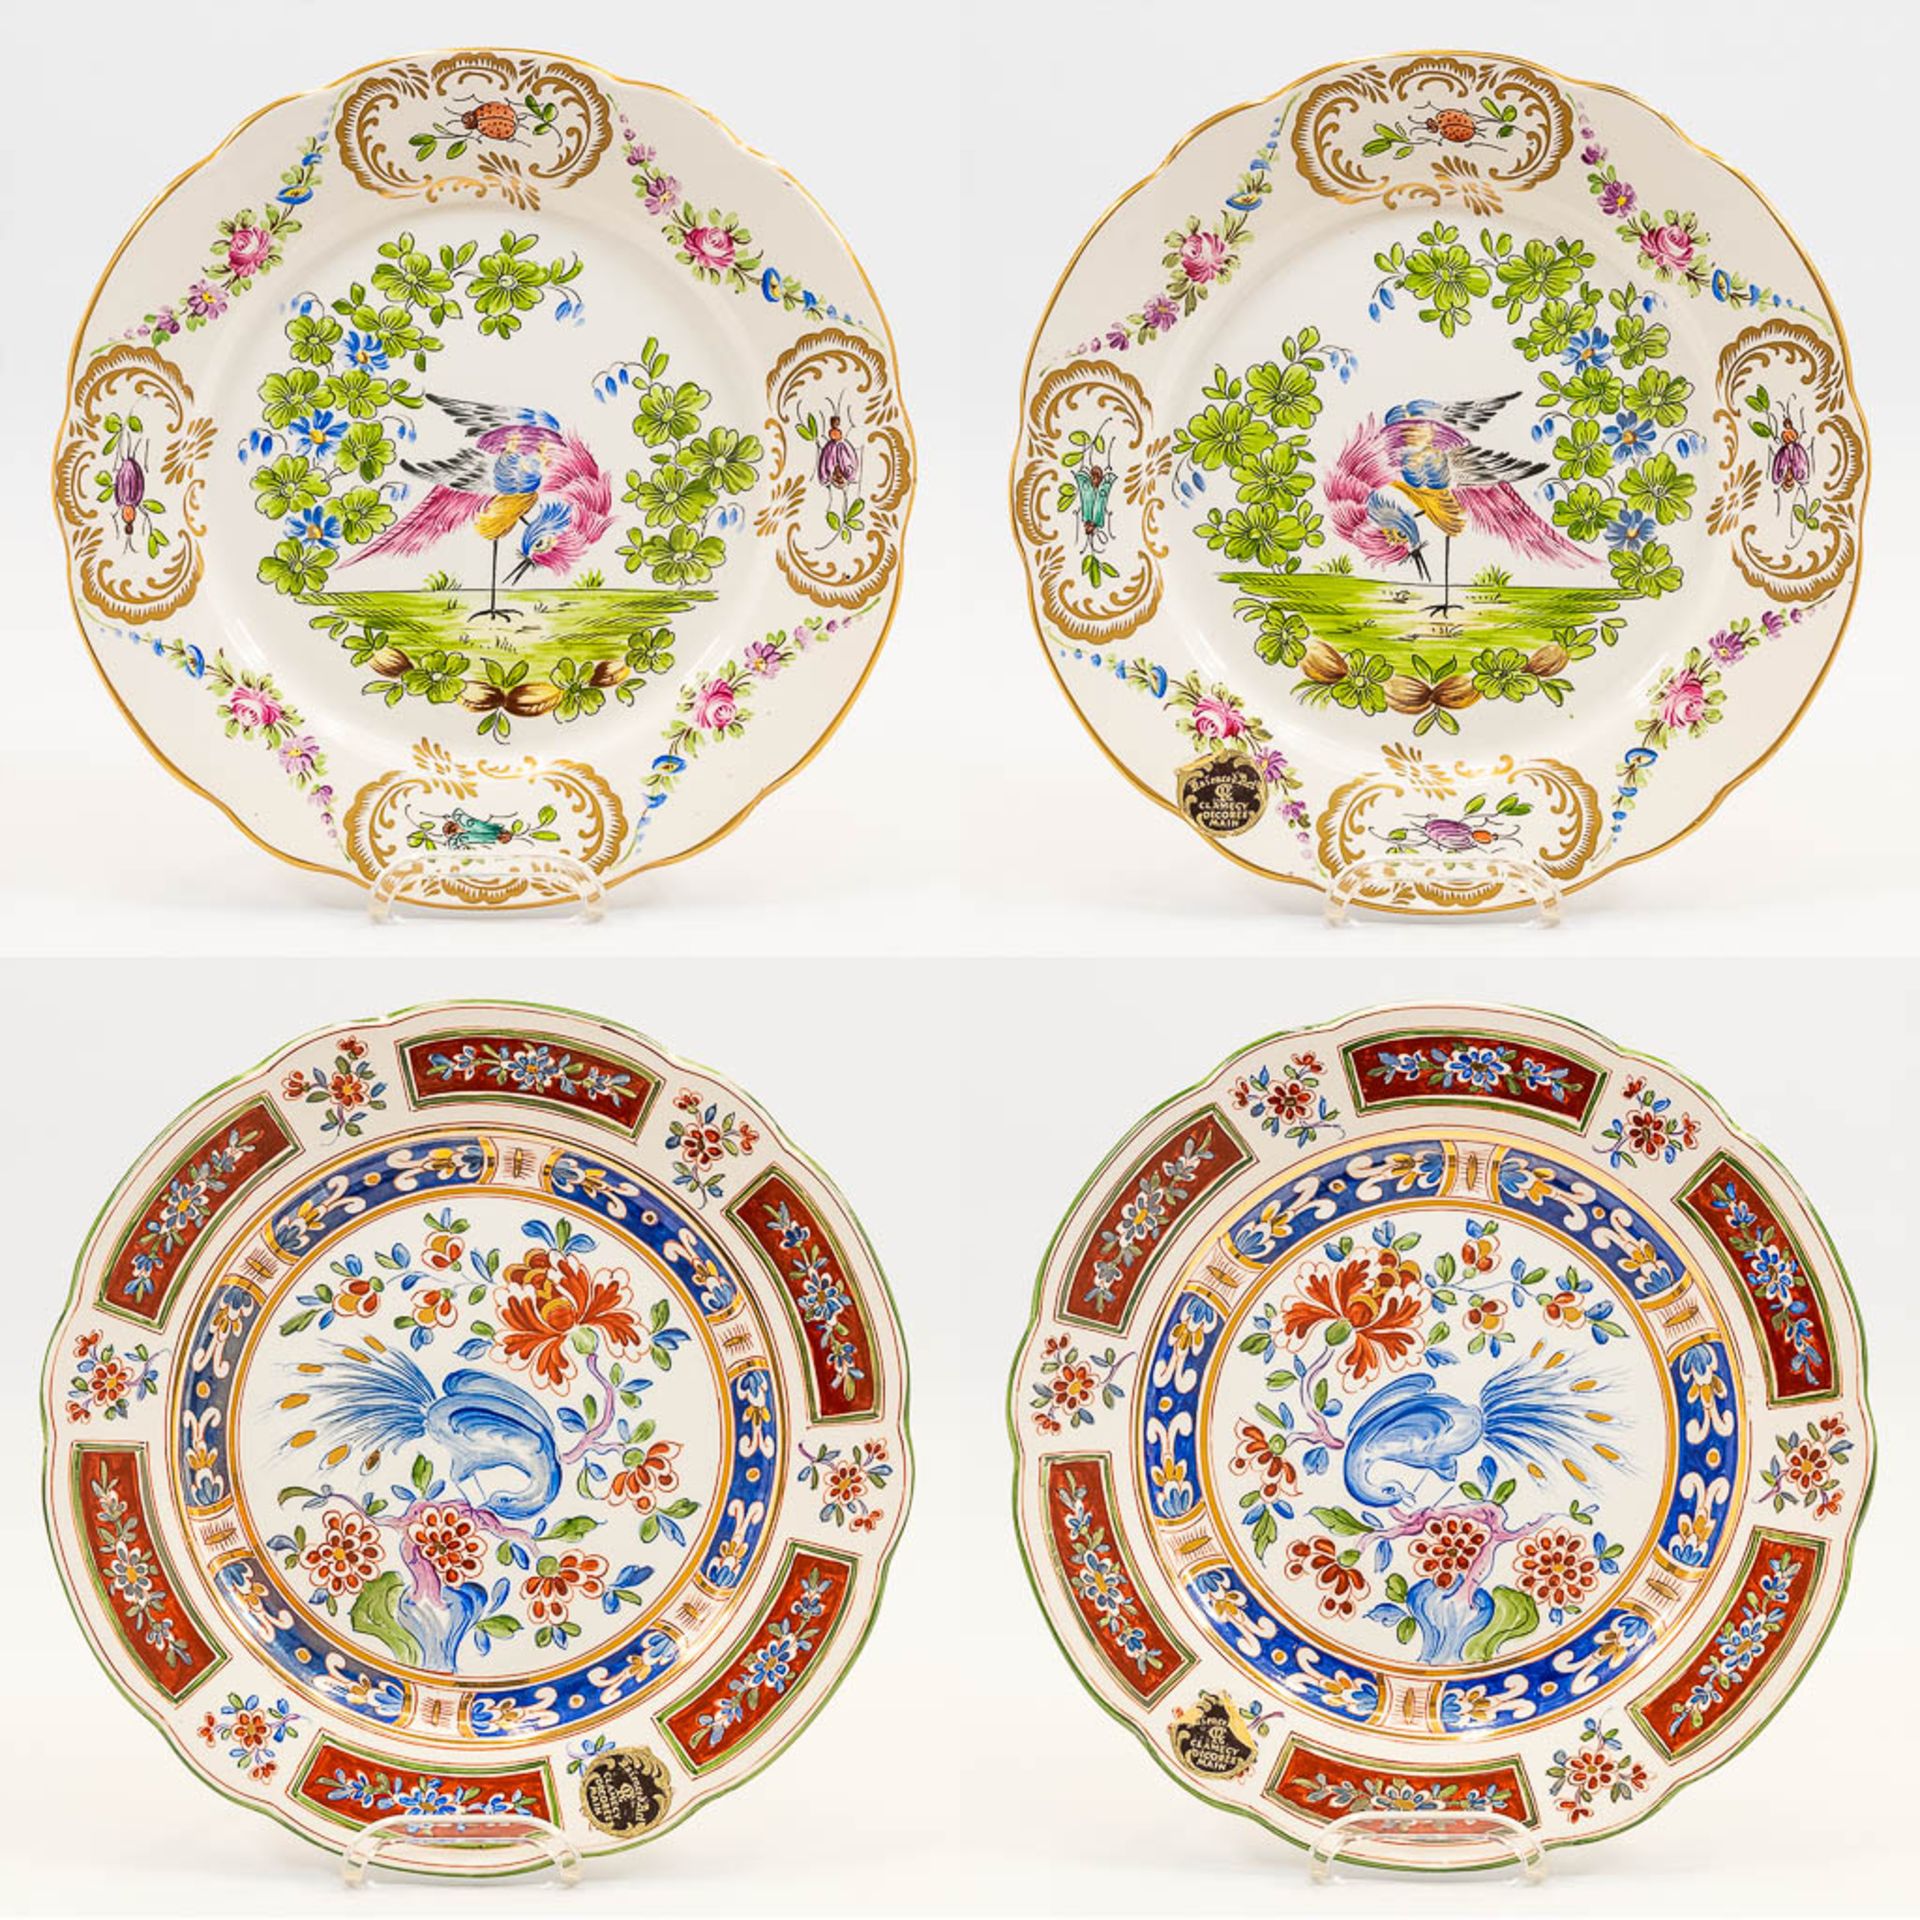 A collection of 2 pairs of faience display plates with hand-painted decor and made in Clamecy, Franc